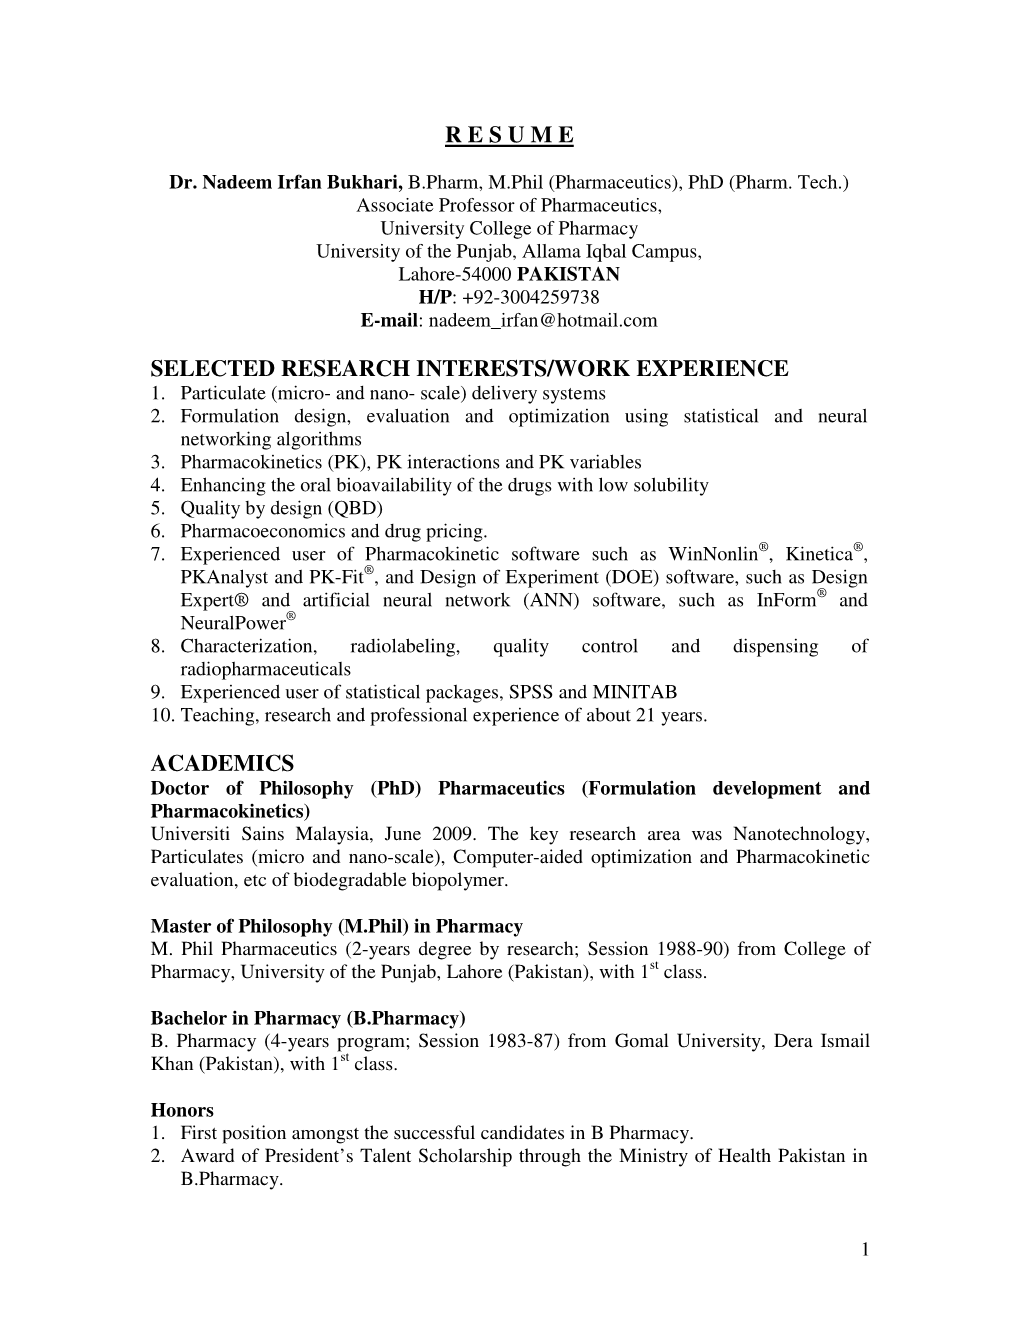 Resume Selected Research Interests